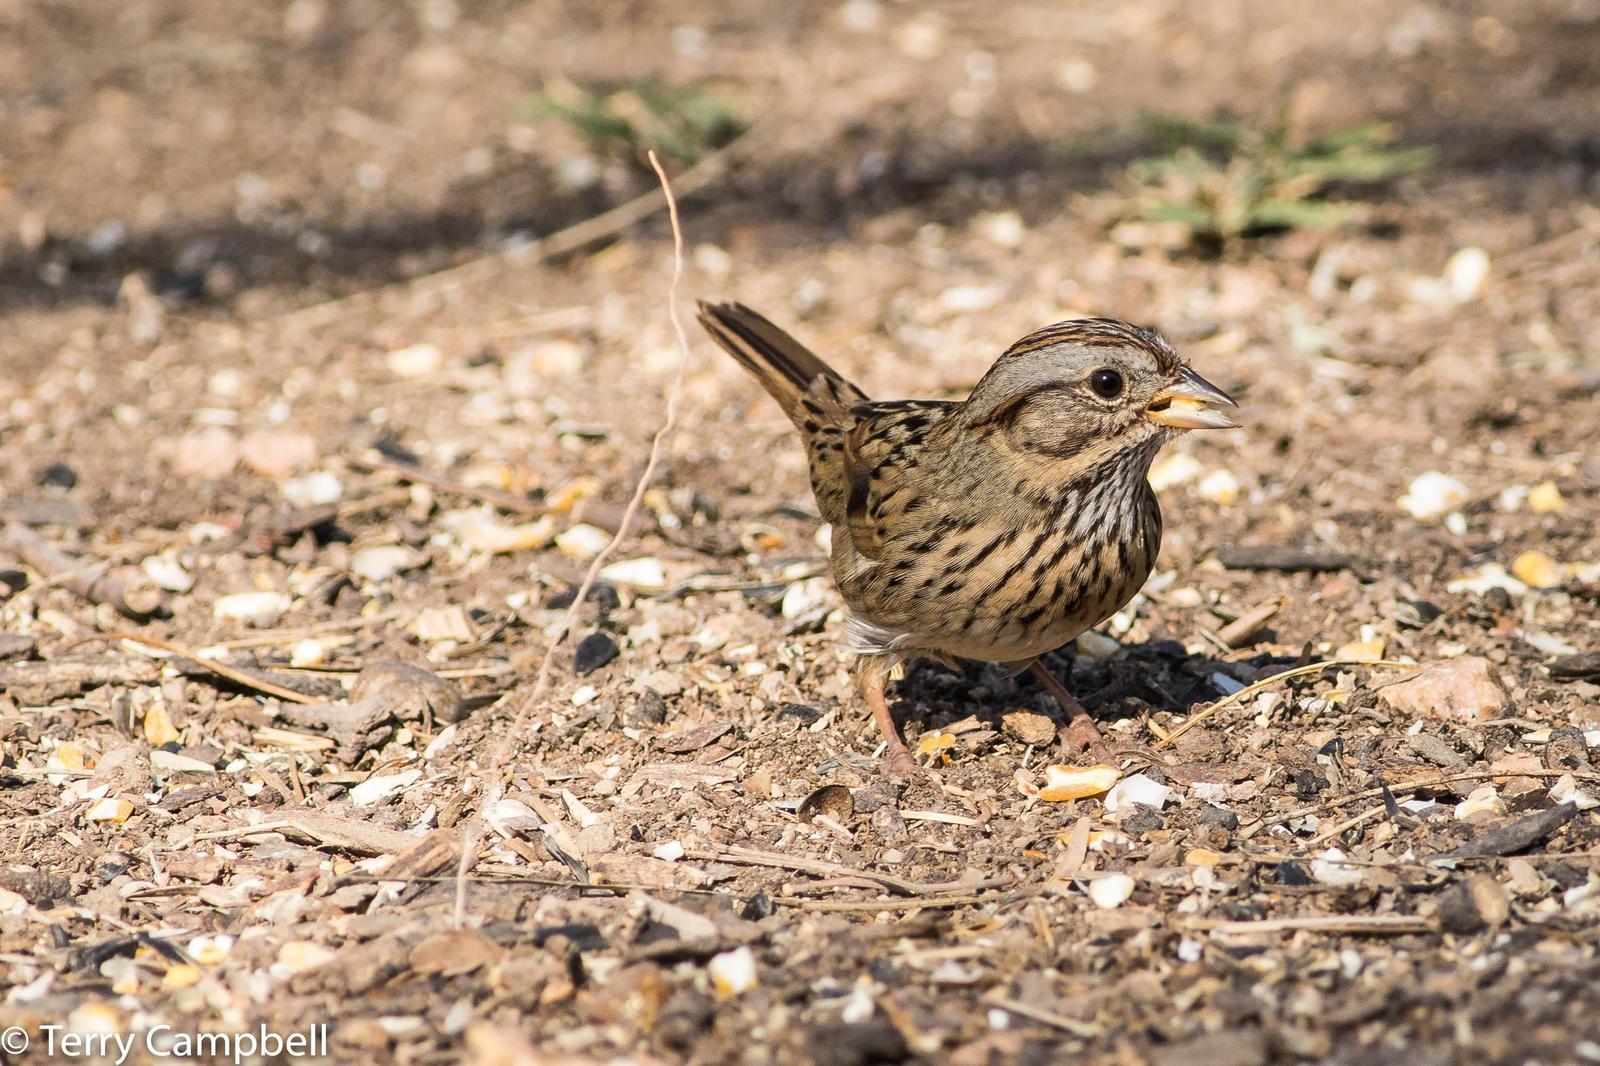 Lincoln's Sparrow Photo by Terry Campbell